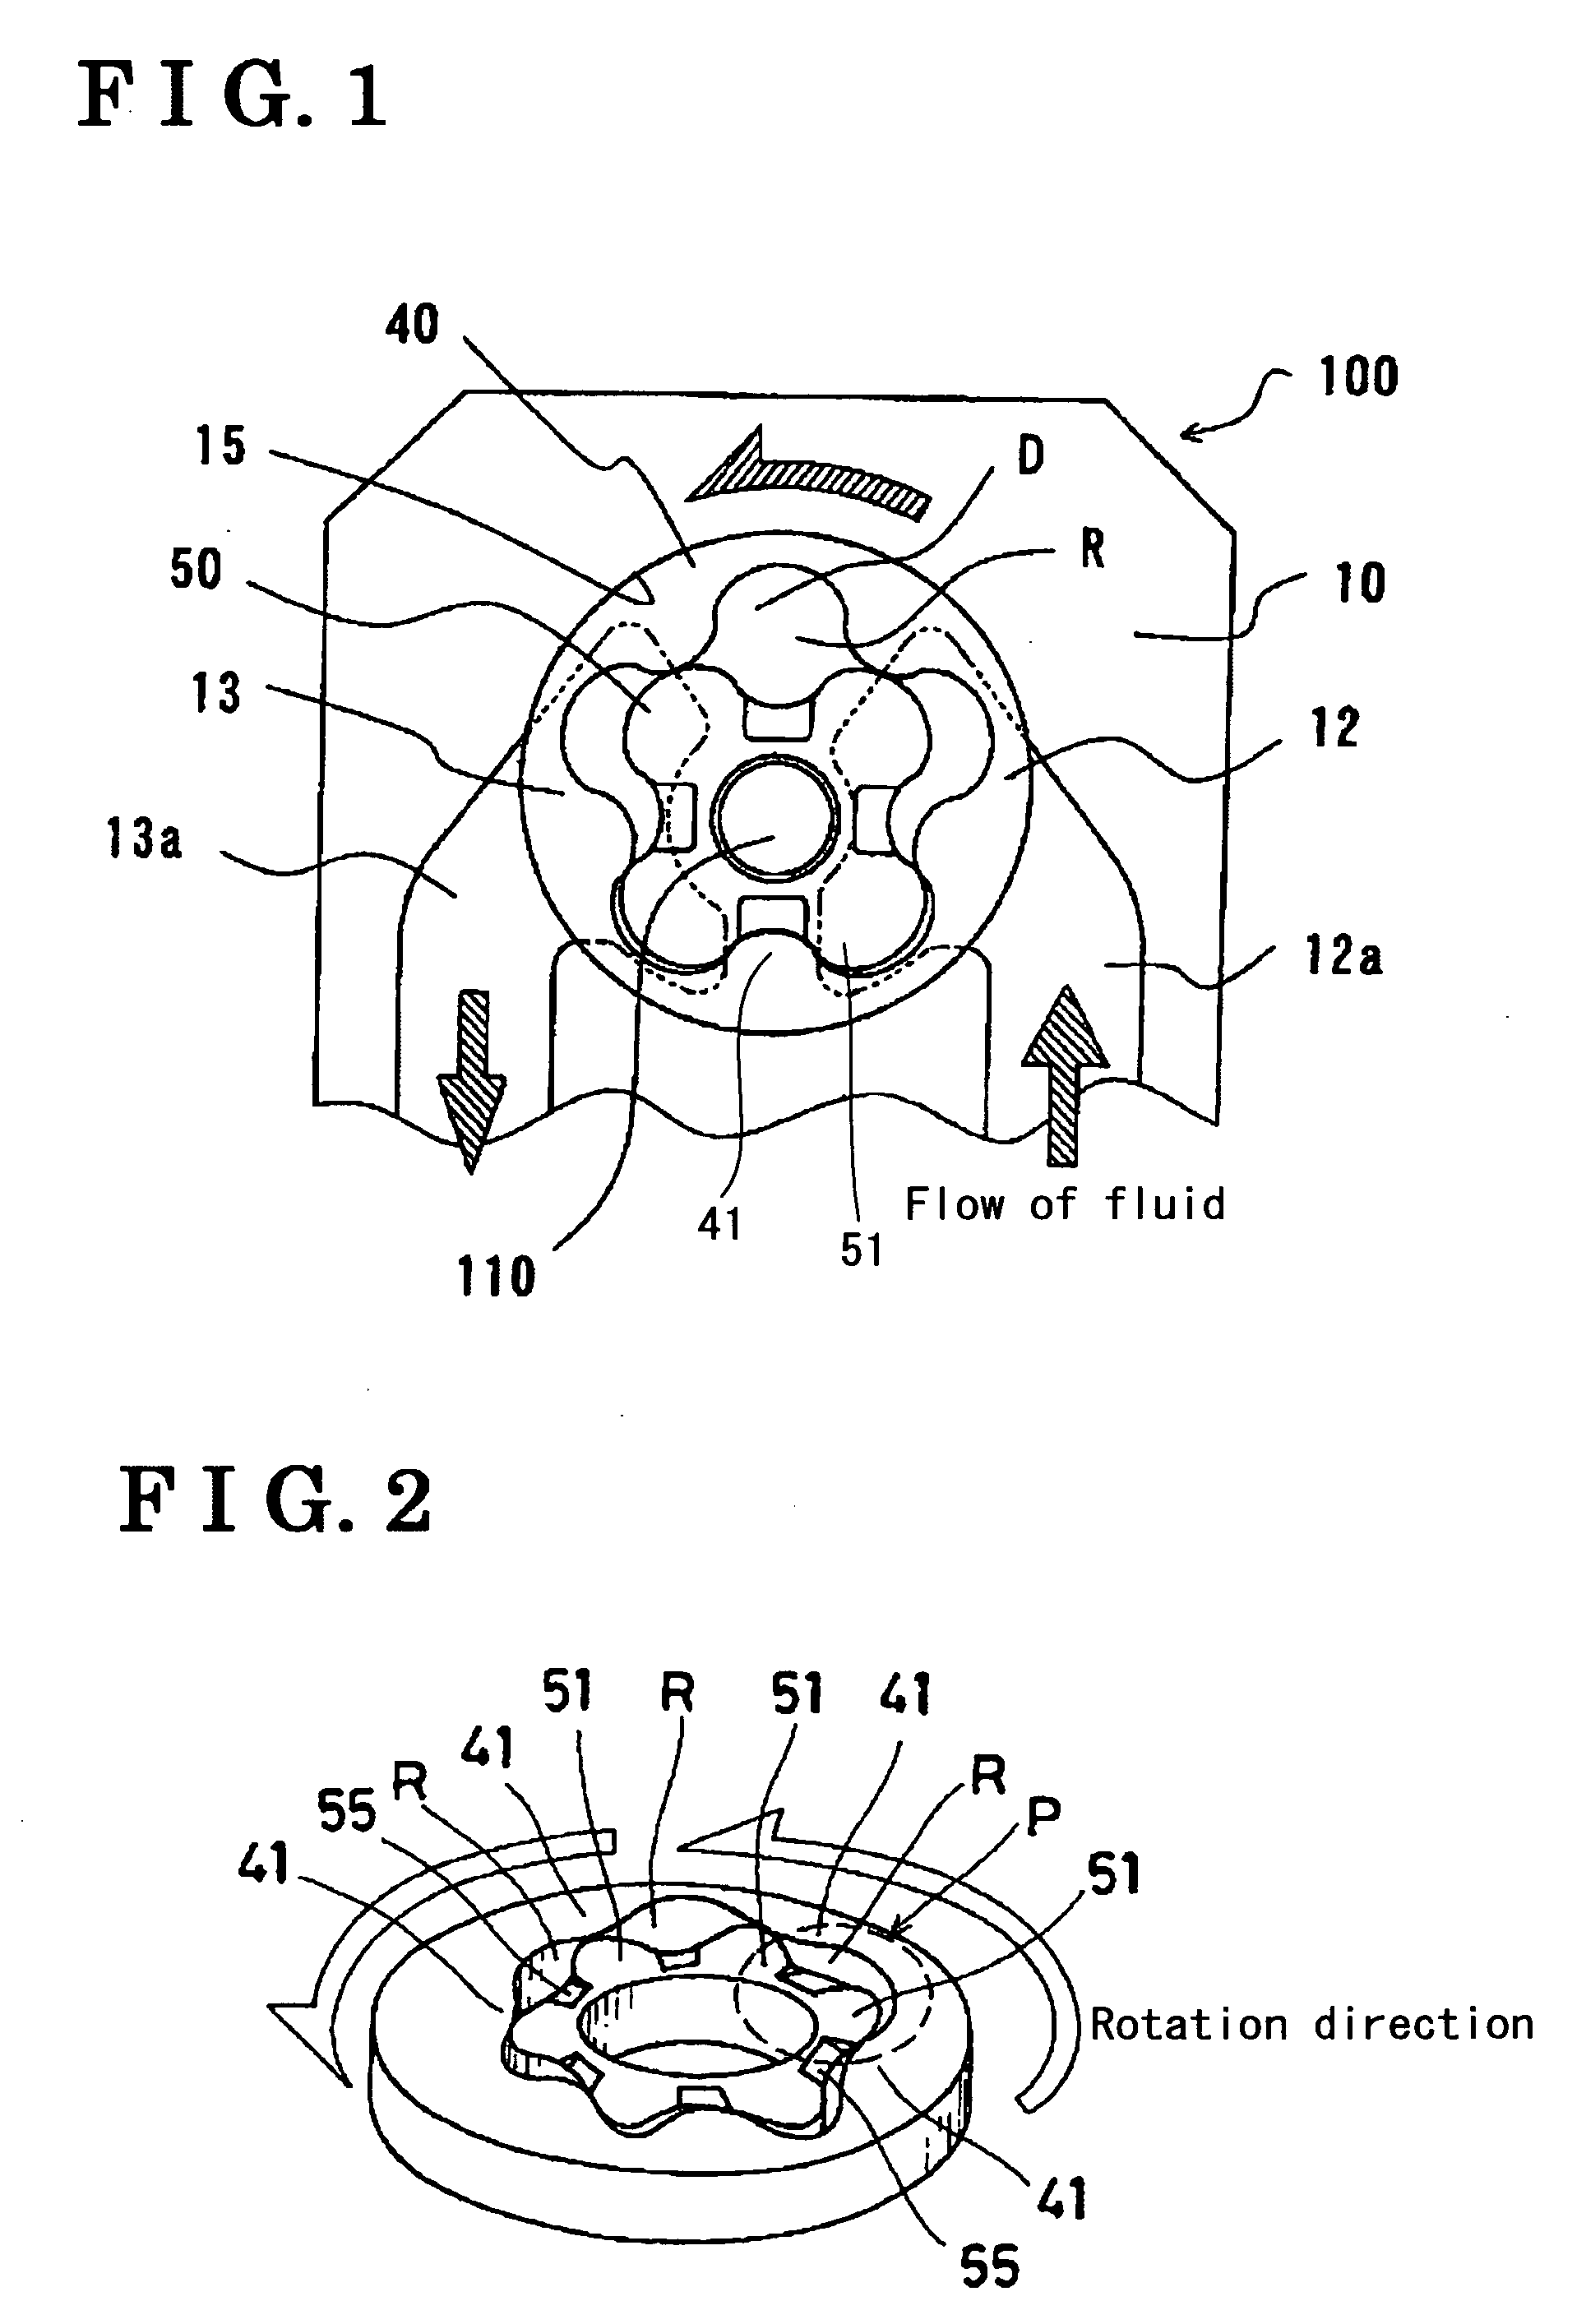 Rotor structure of inscribed gear pump